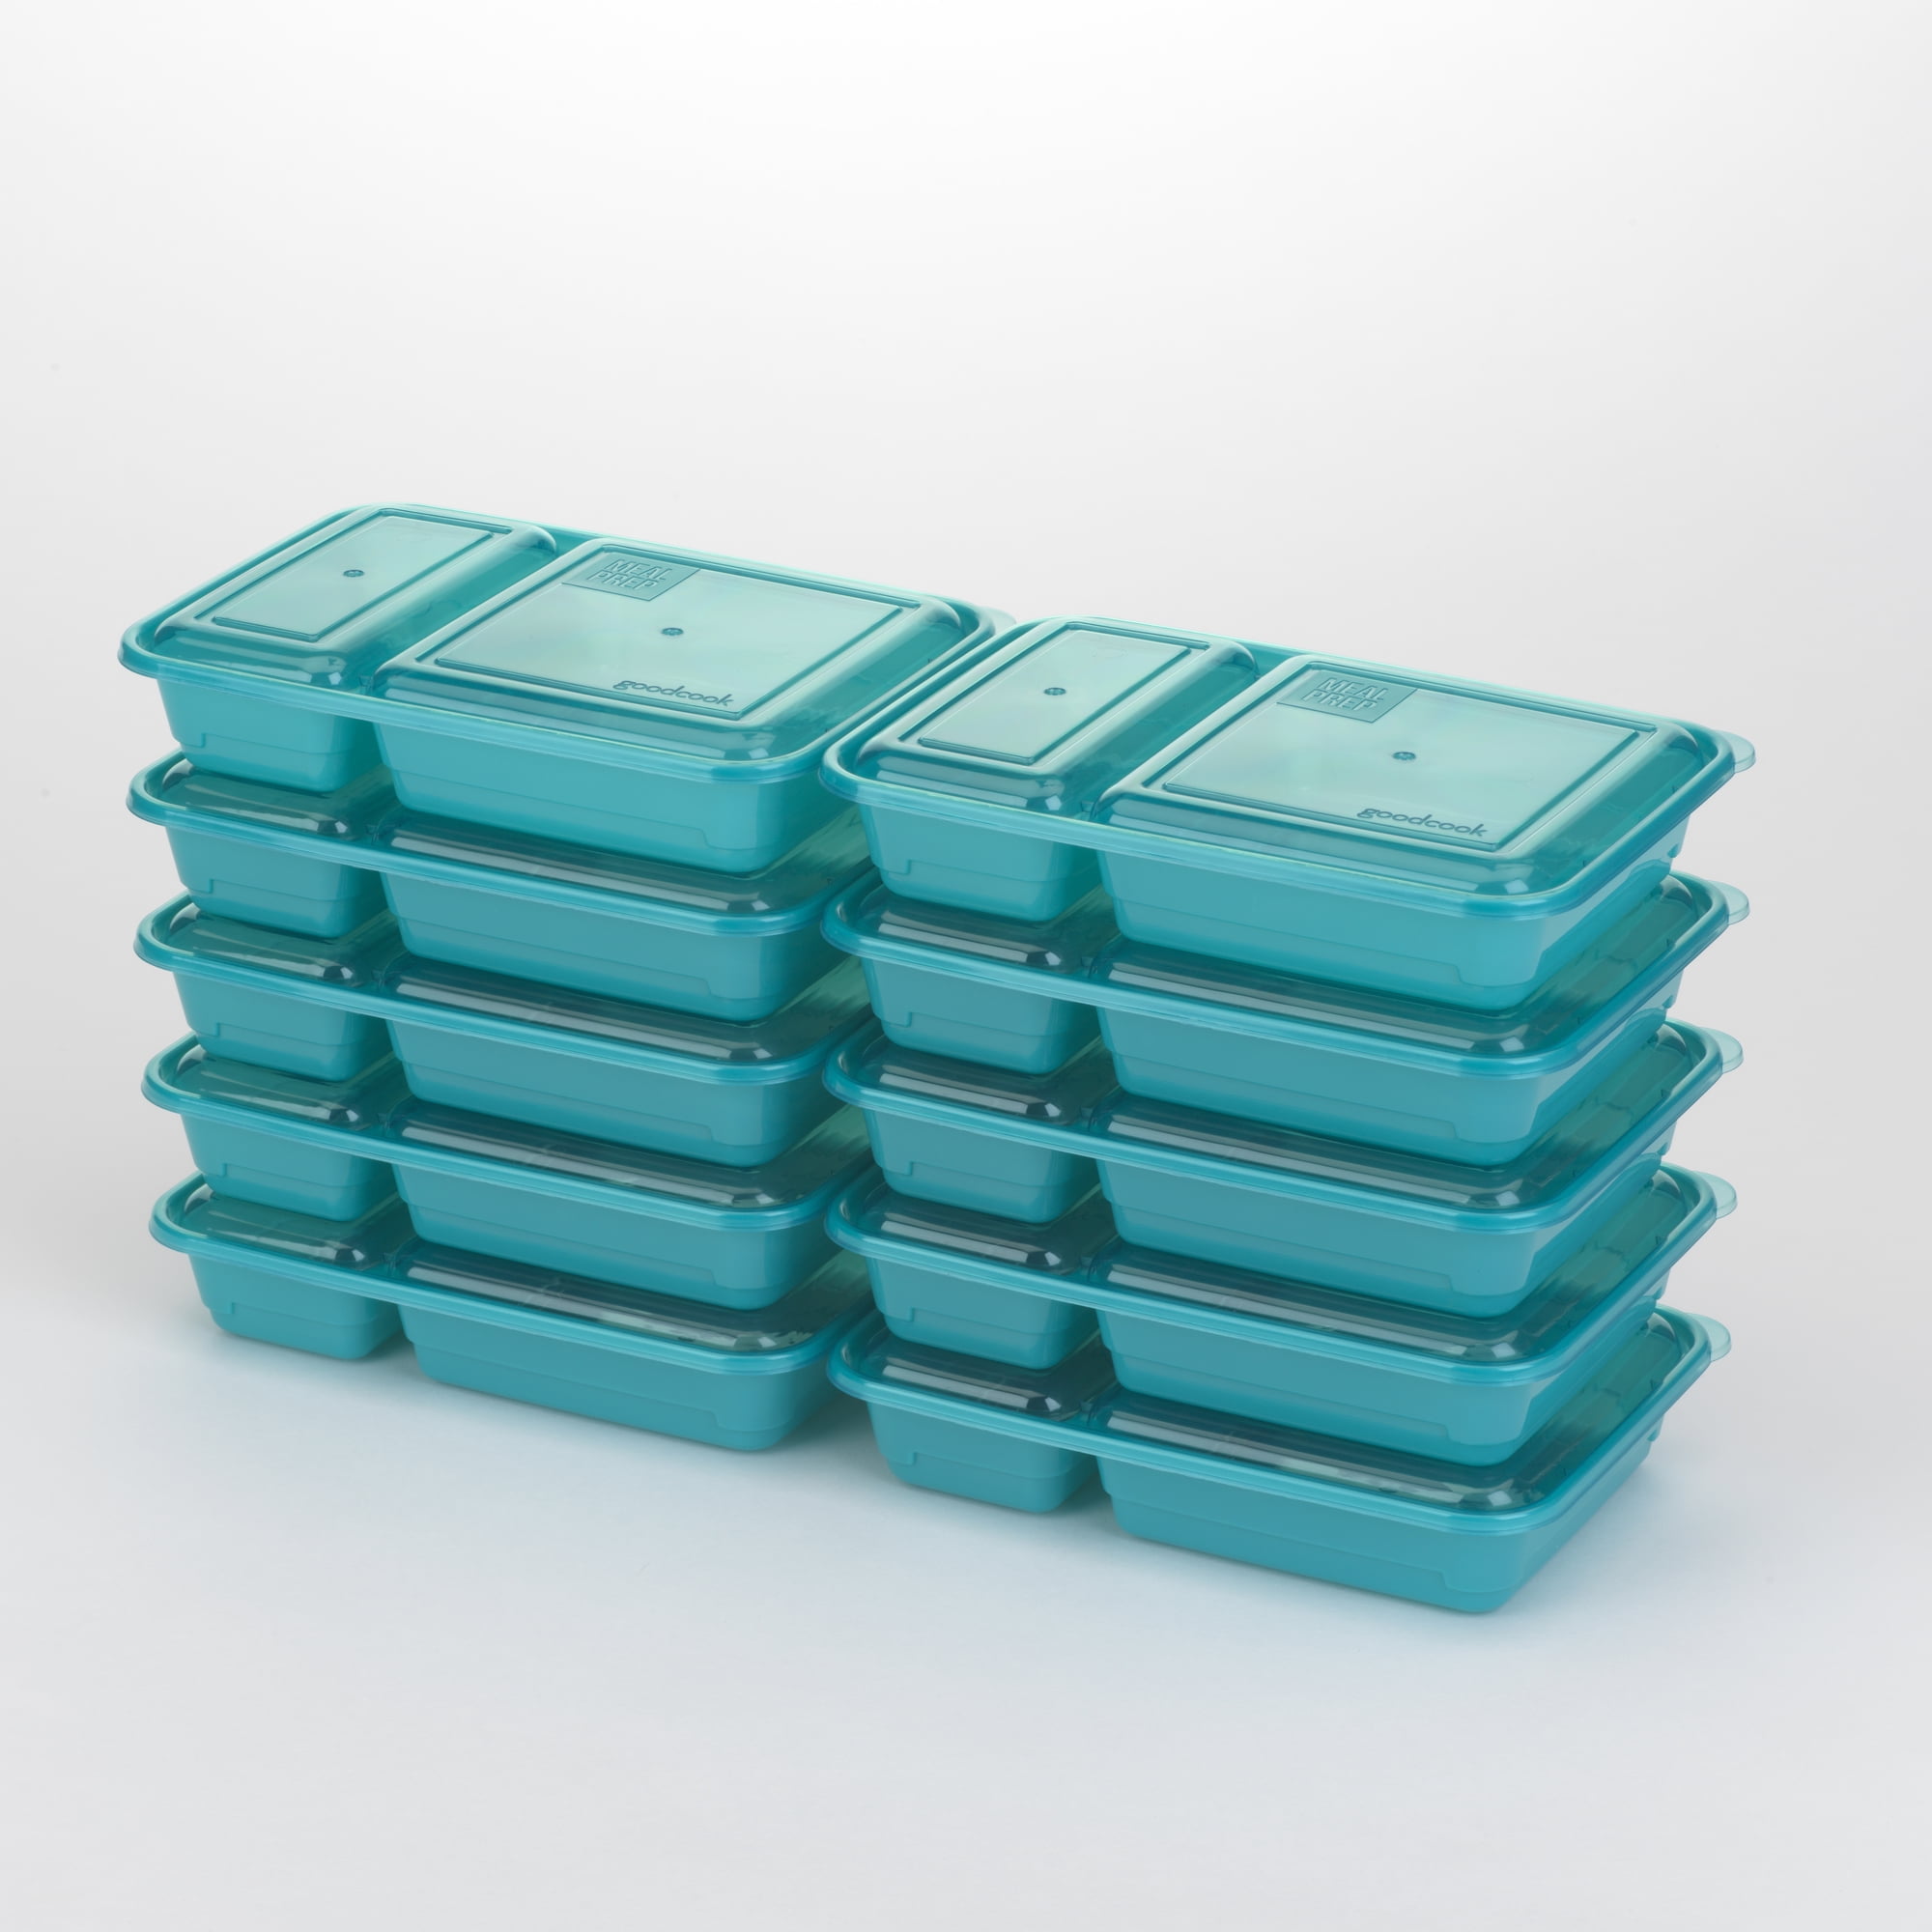 70% Off GoodCook Meal Prep Containers at Kroger Stores